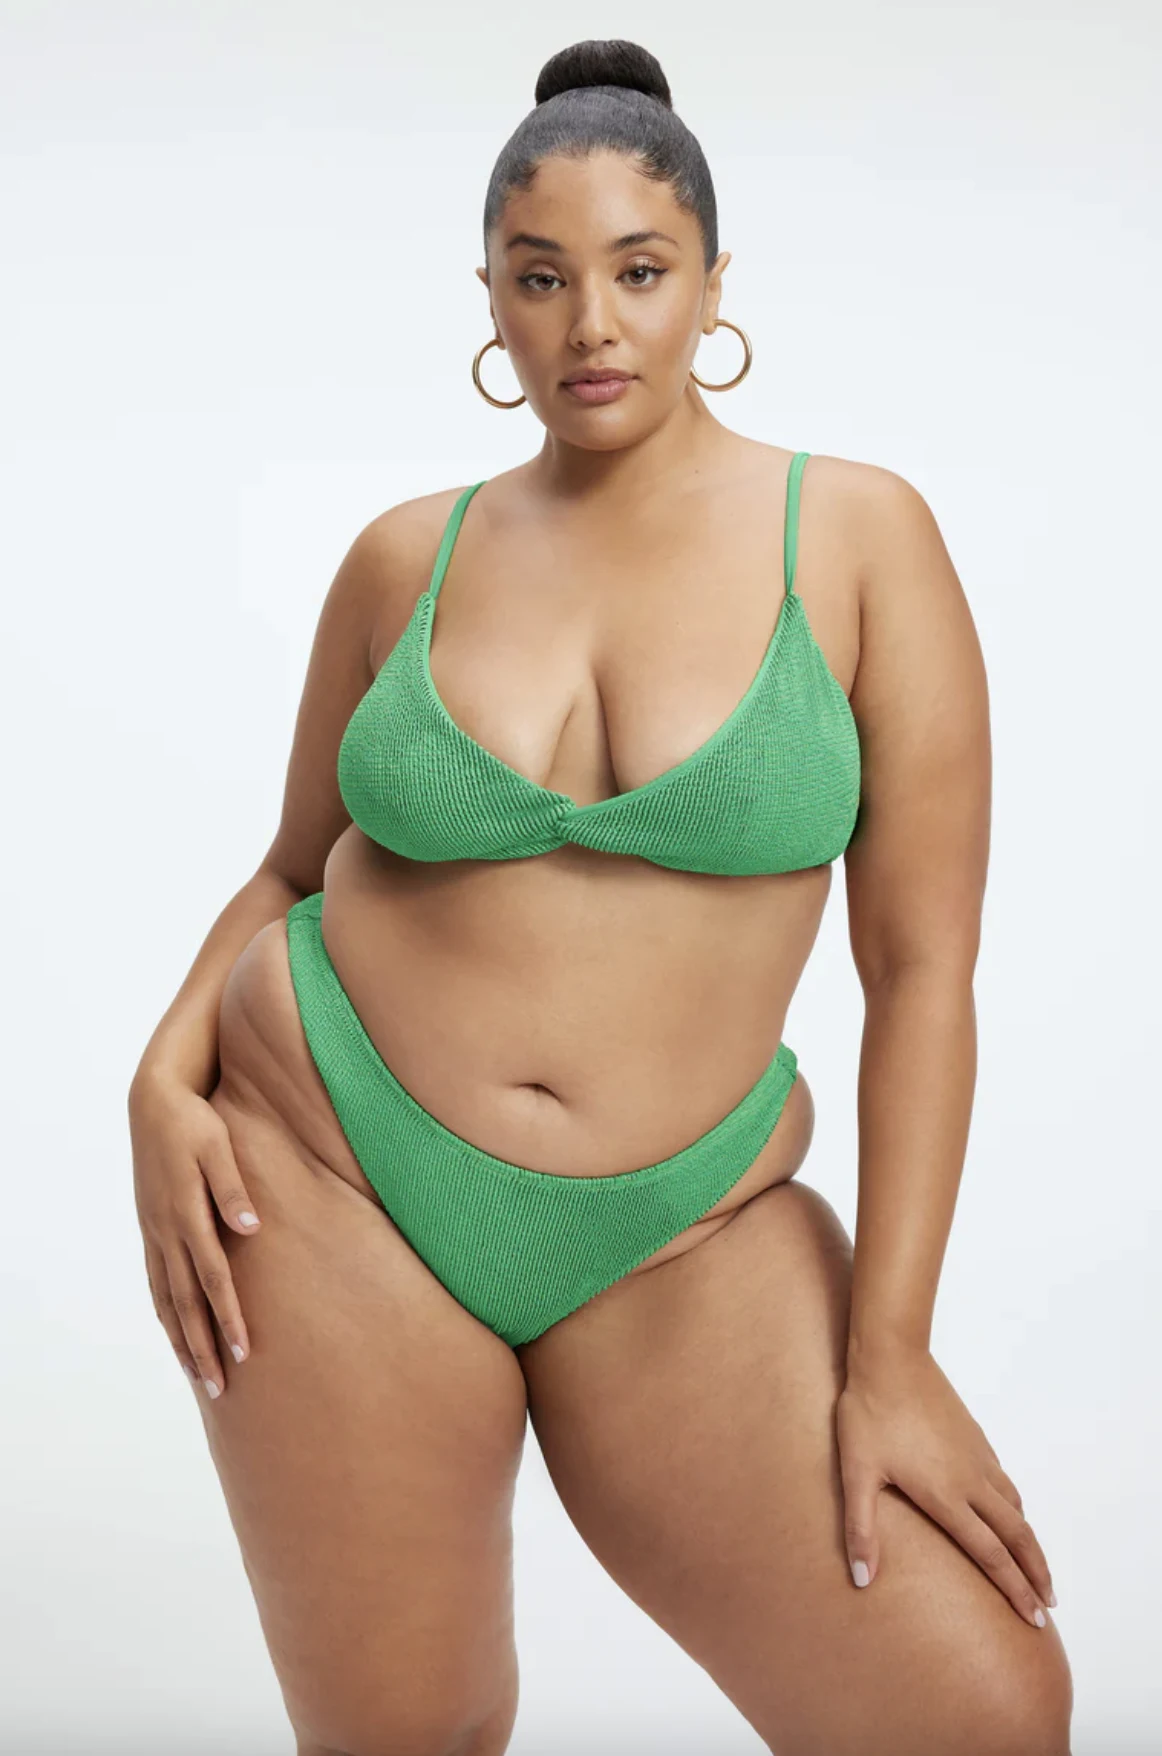 arun guha recommends Chubby Women In Bathing Suits